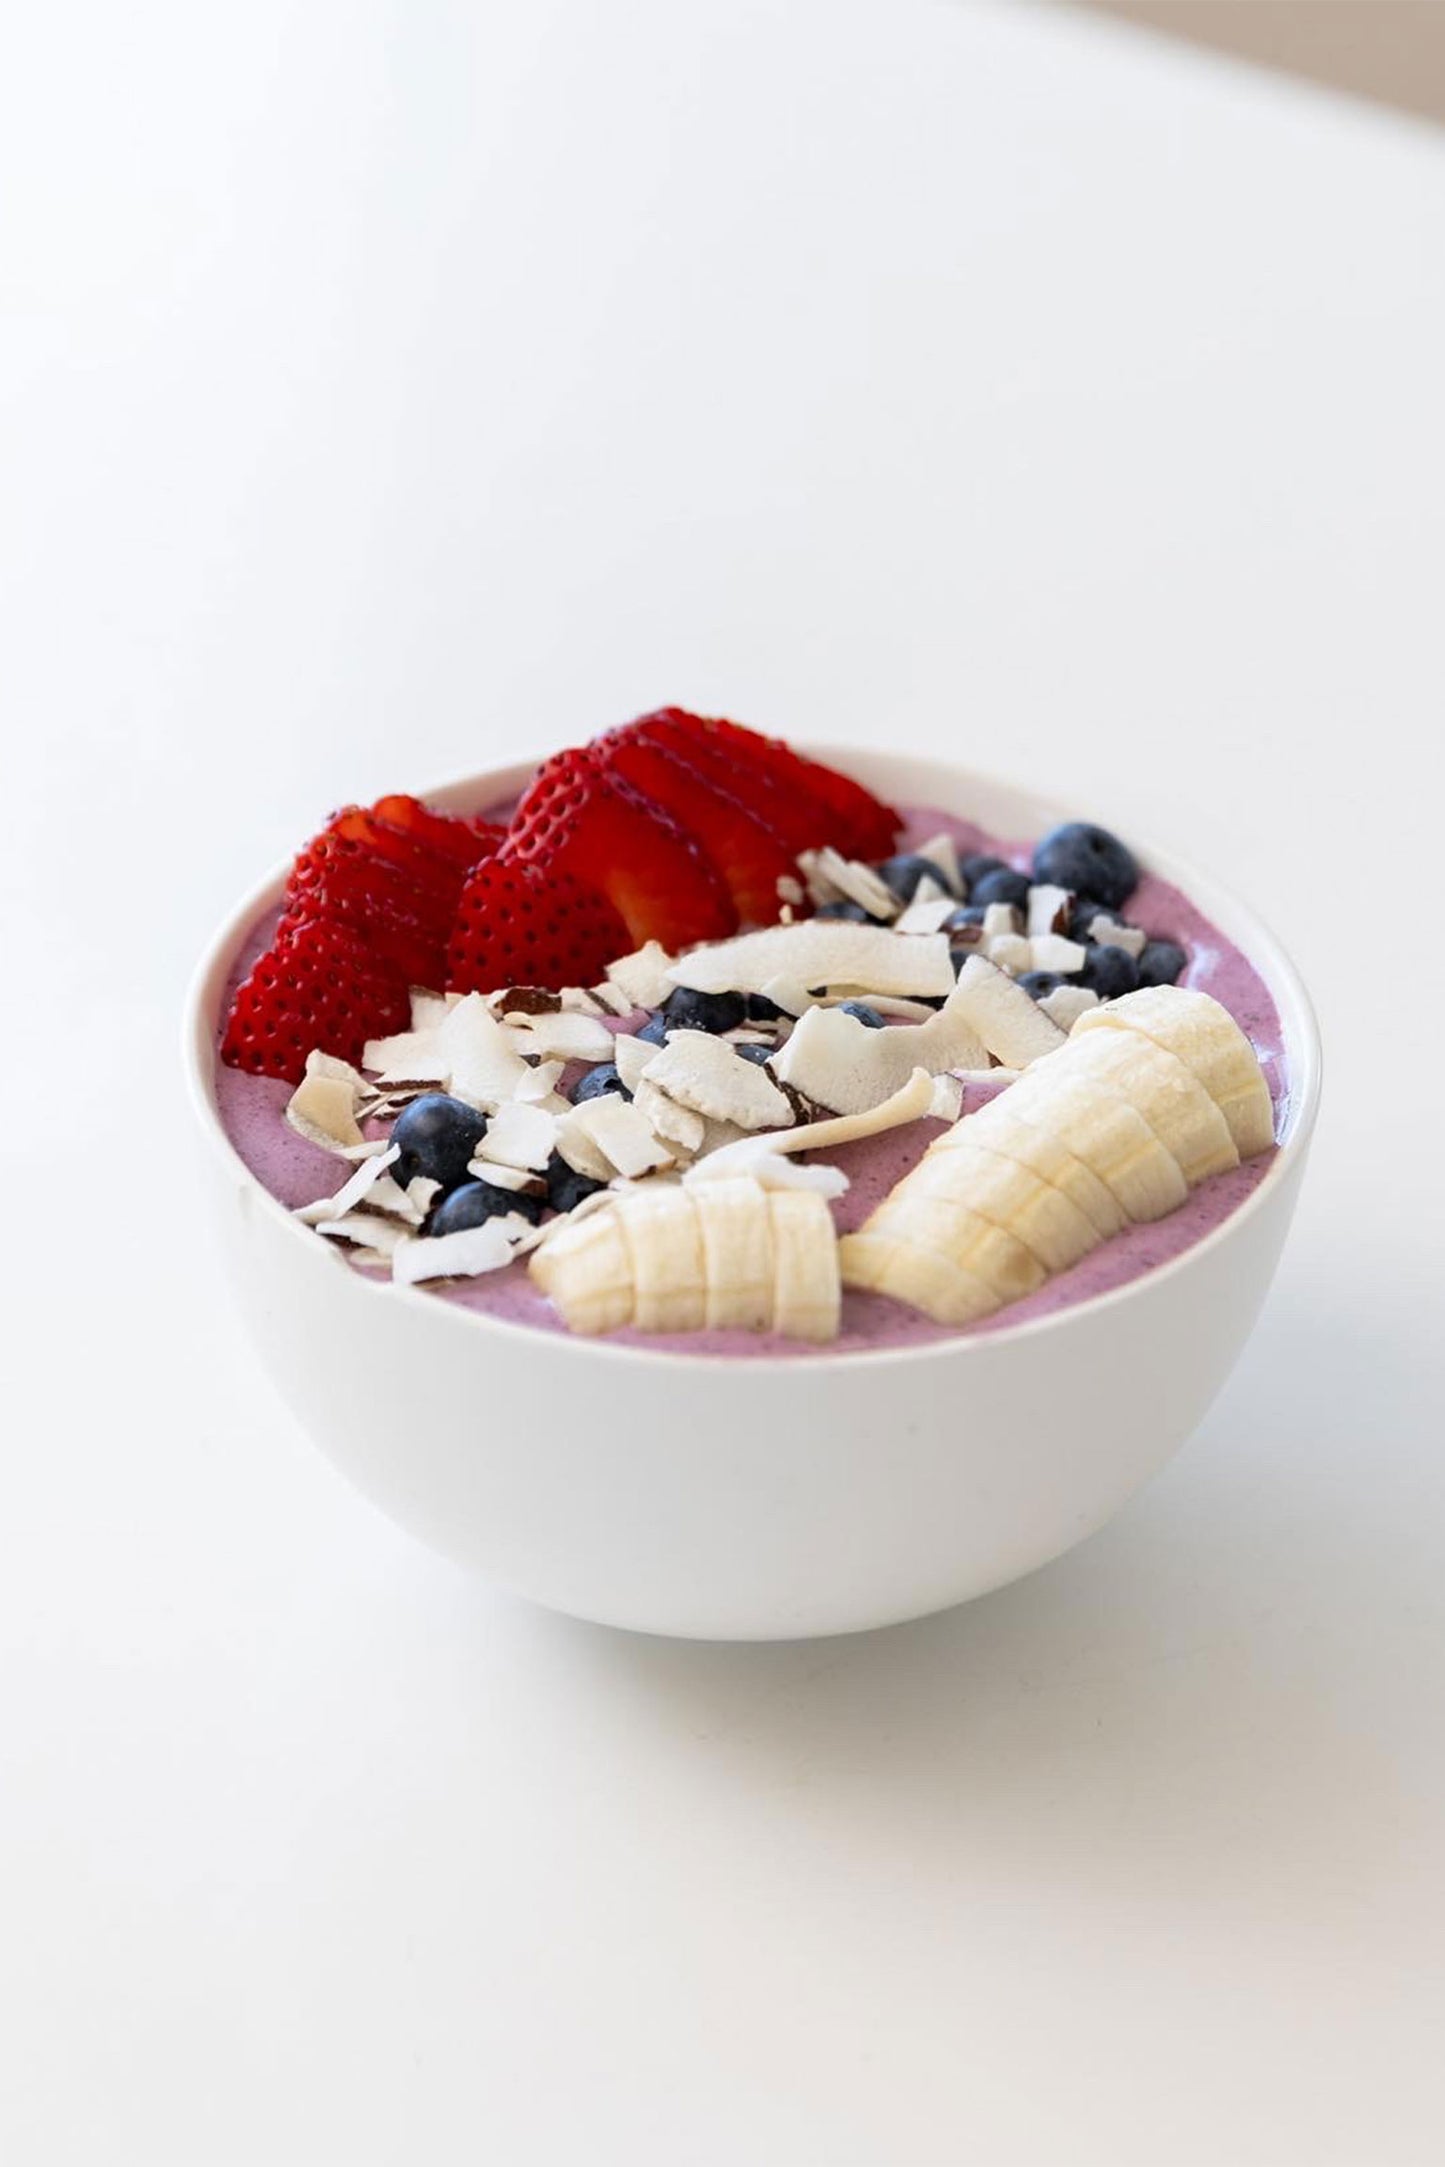 The Mixed Berry Smoothie Bowl